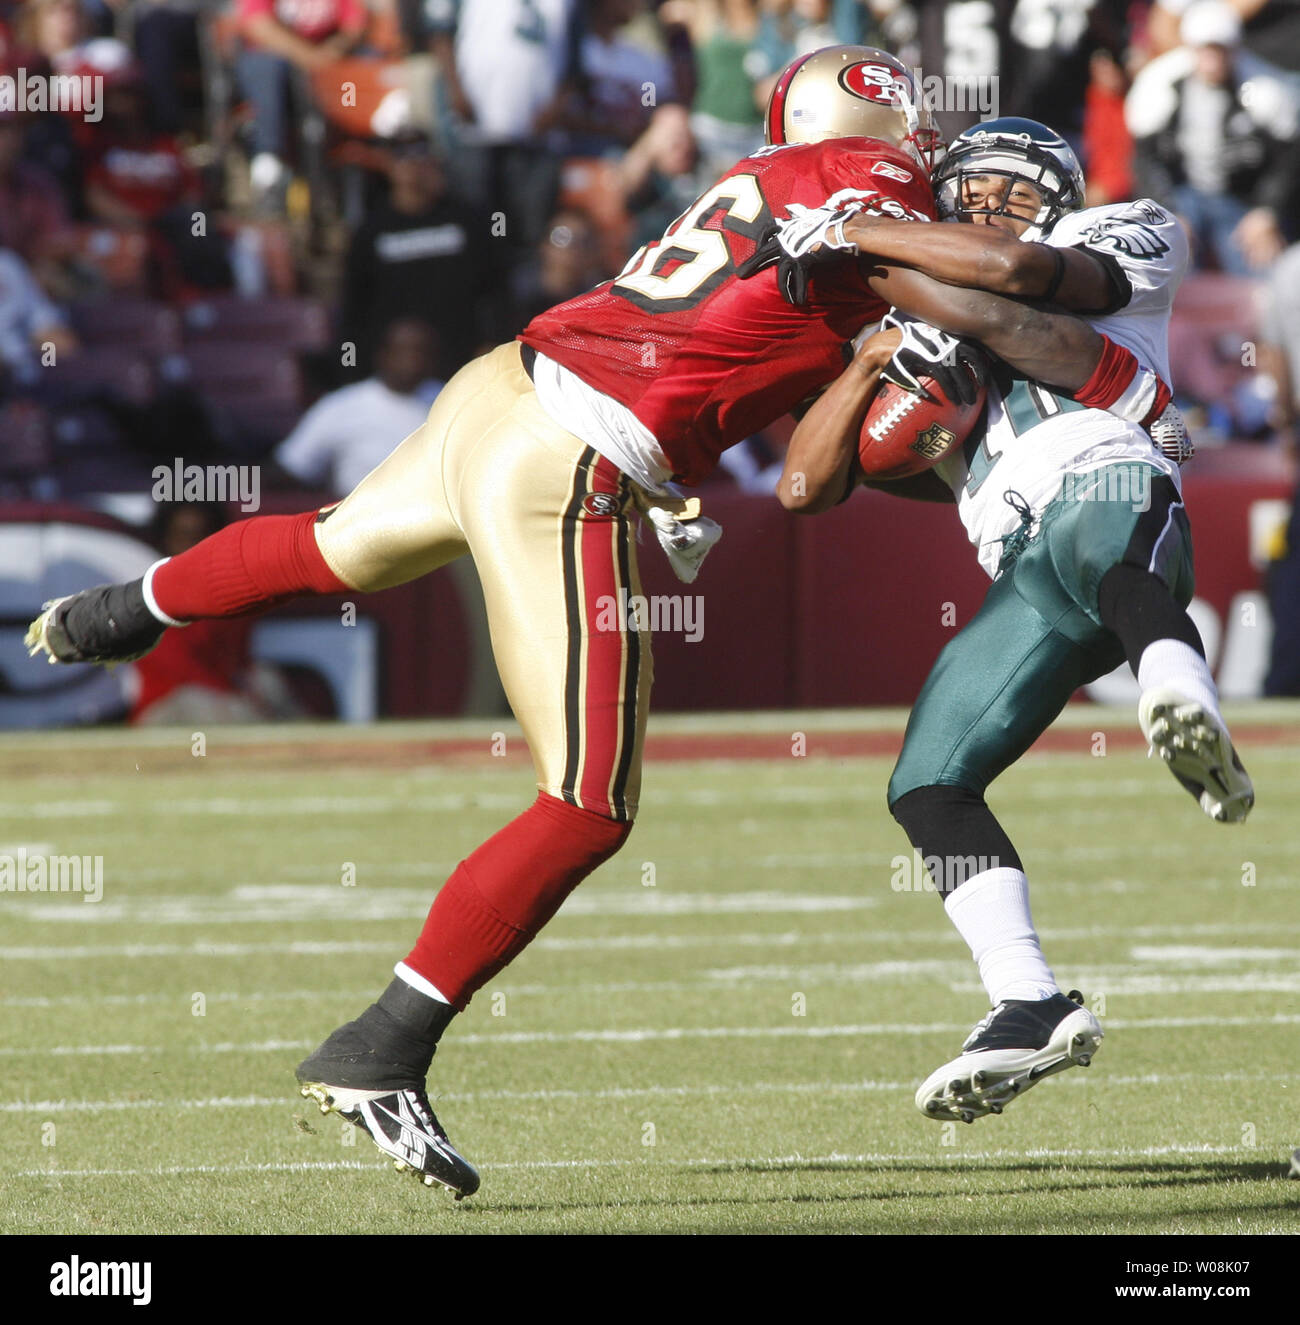 Philadelphia Eagles WR DeSean Jackson (R) is knocked off his feet by  San Francisco 49ers Delanie Walker (L) at Candlestick Park in San Francisco on October 12, 2008. The Eagles defeated the 49ers 40-26.  (UPI Photo/Terry Schmitt) Stock Photo